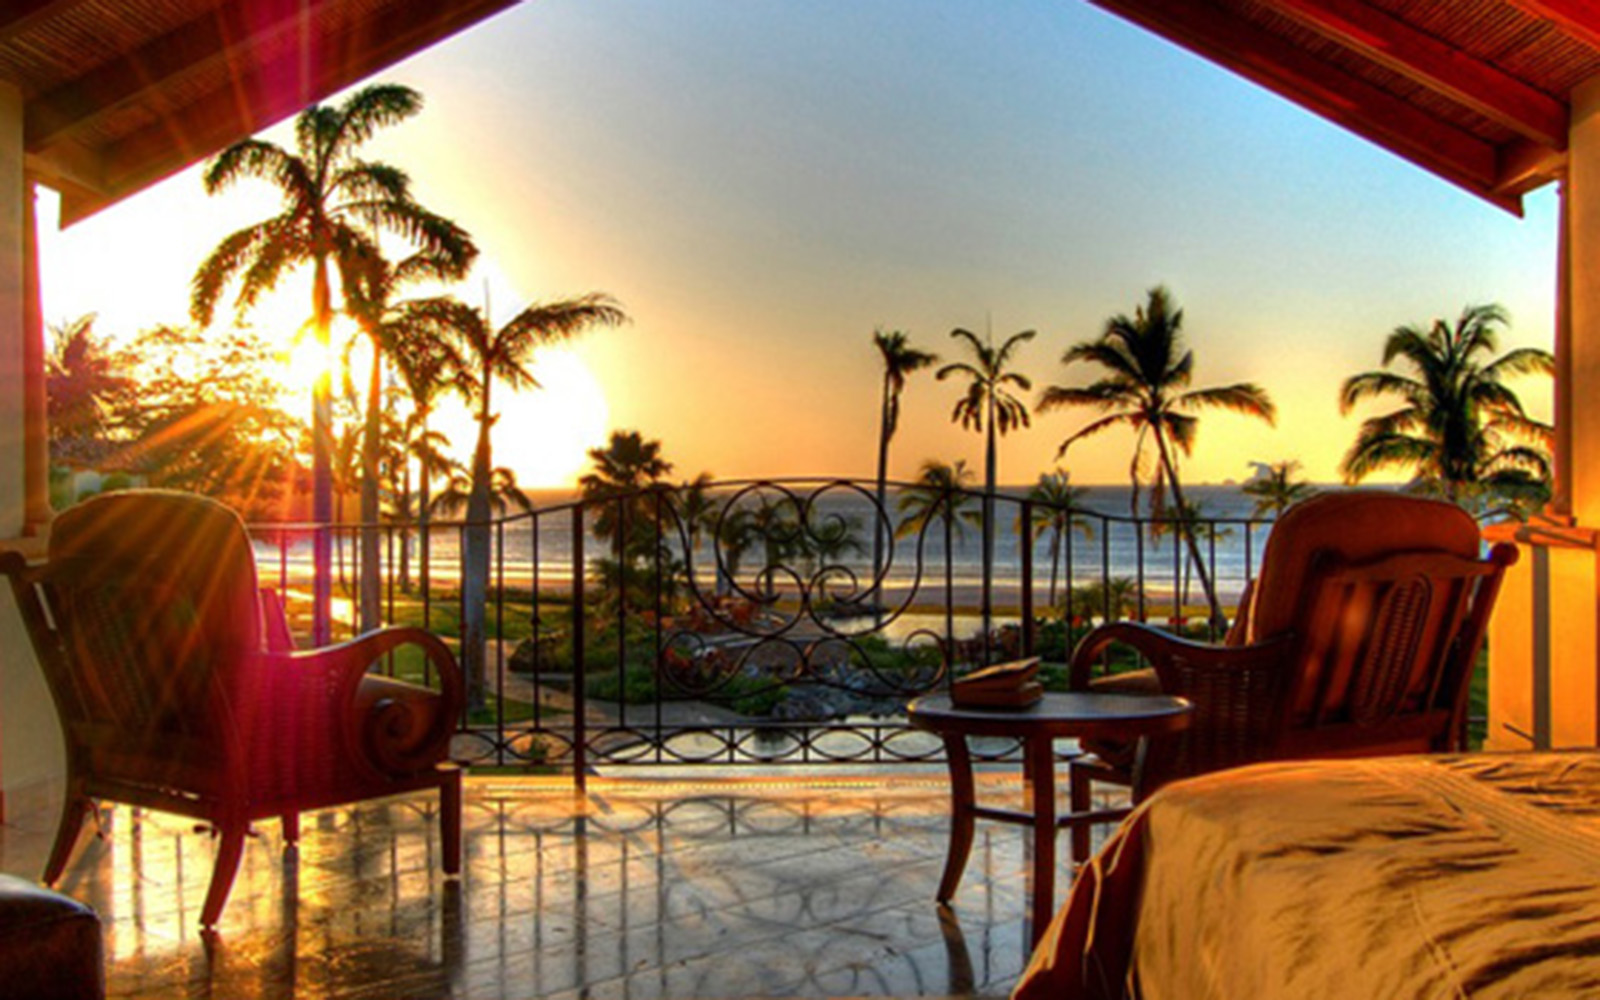 The Palms Luxury Ocean Front Gated Property Right On Flamingo Beach, Costa Rica